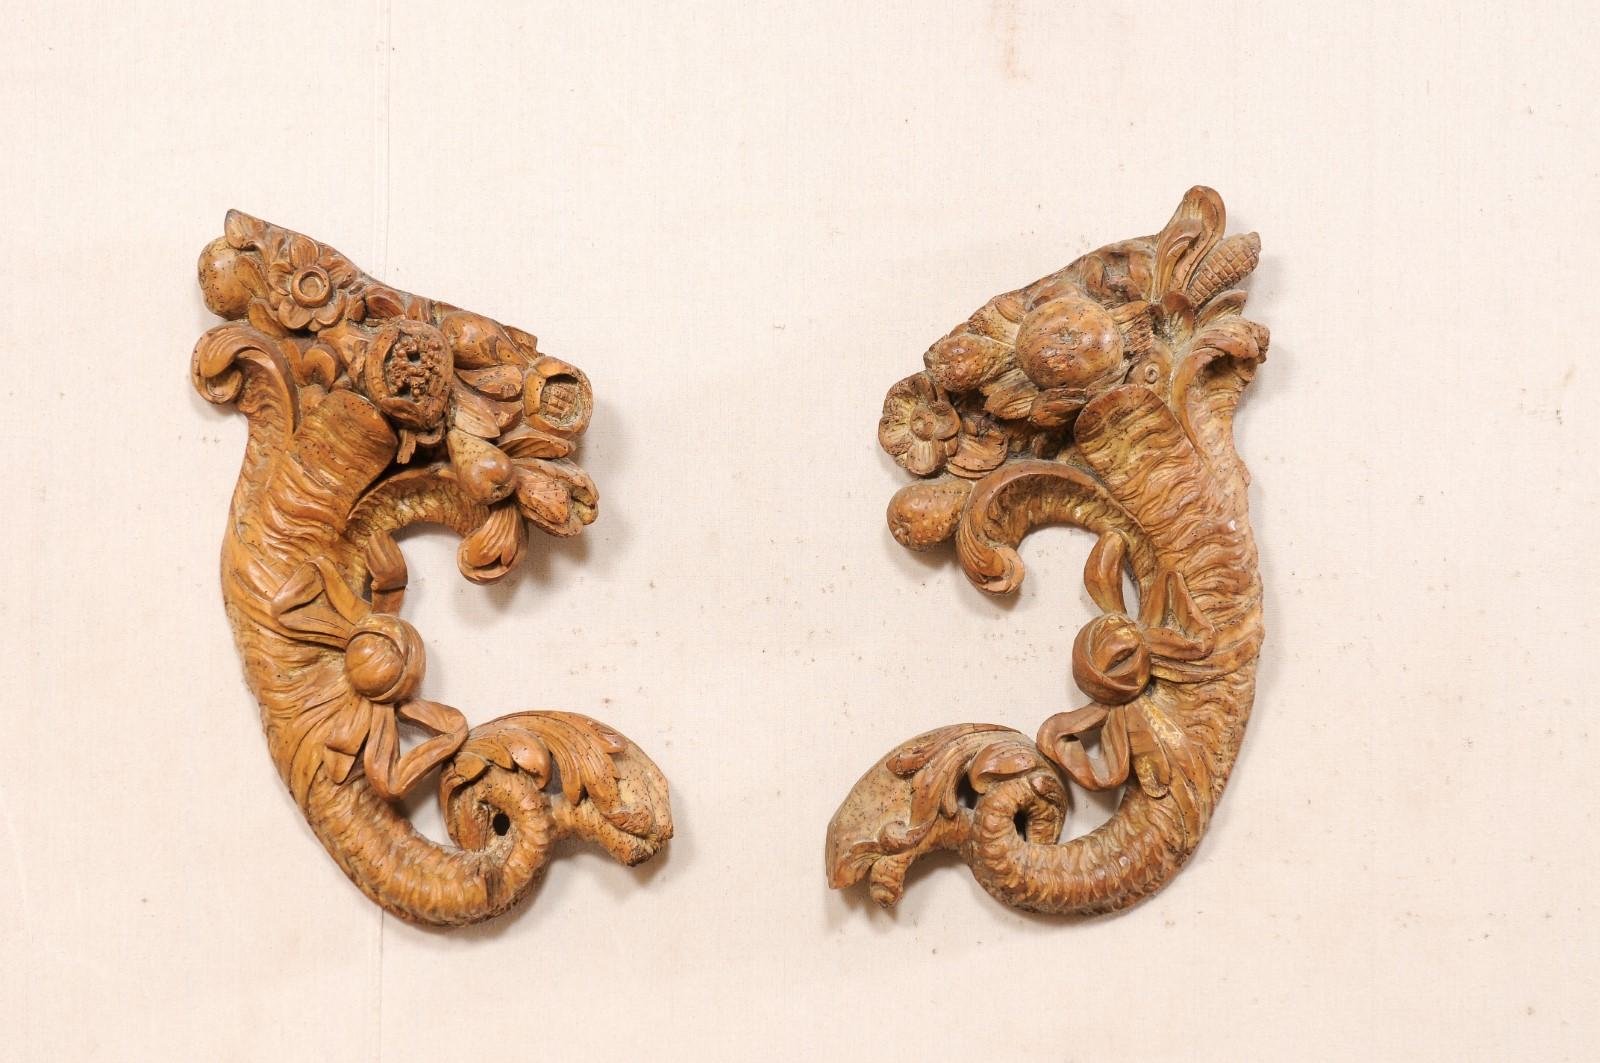 A French pair of carved-wood cornucopia wall decorations from the turn of the 18th and 19th century. This antique pair of wall plaques from France have each been hand-carved, depicting cornucopias filled with flowers and bow-tied ribbons at their